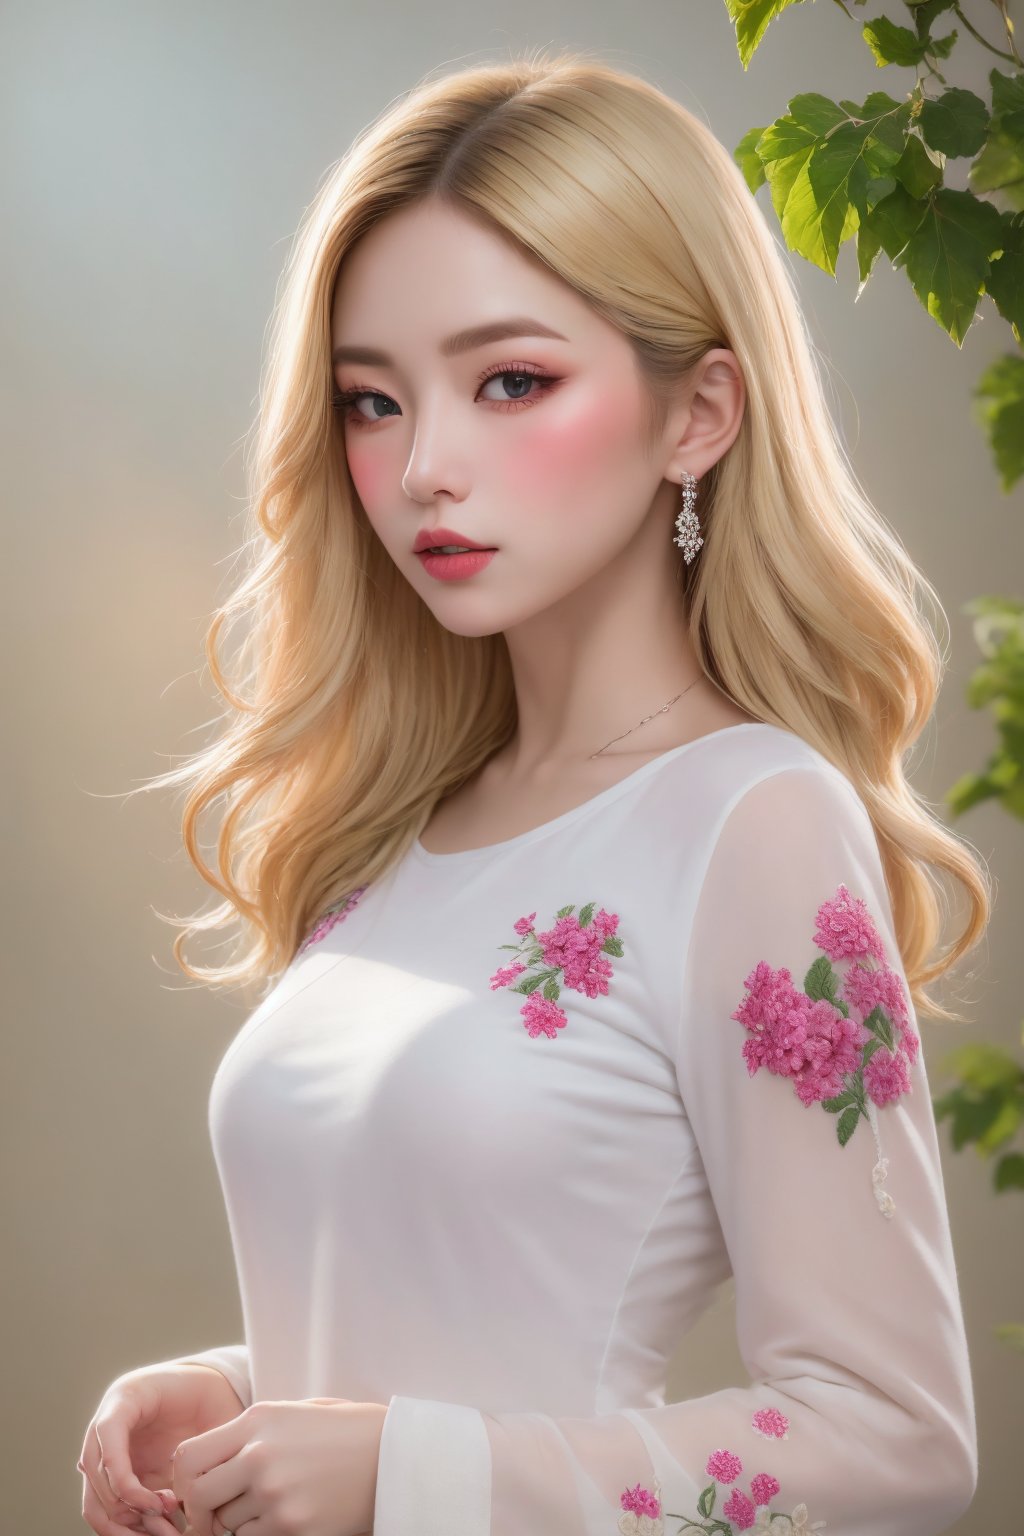 masterpiece, top quality, best quality, official art, beautiful and aesthetic:1.2), extreme detailed. 1 girl, long blonde hair, flowers and leaves entwined within her tresses, shades of white and yellow, wearing white top, ruffled detailing, embroidered pastel color floral chest motif, sleeves billowing at shoulders, tapering to wrists, hands clasped, soft and delicate aesthetic, intricate details in hair and clothing, light-hued background, subject focused, digital painting,more detail XL,watercolor